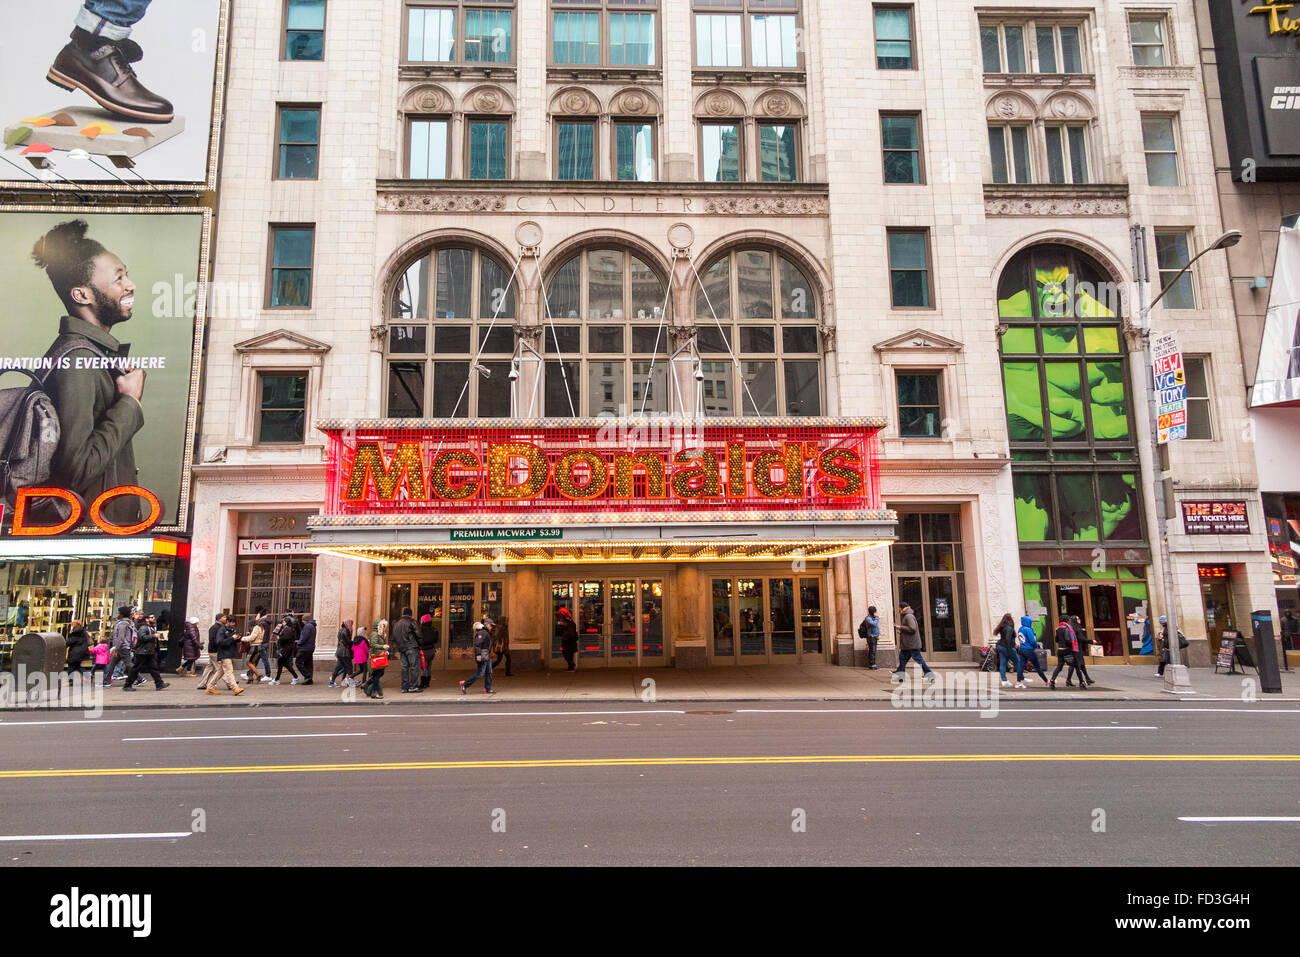 Vintage marquee sign above the entrance to the McDonald's restaurant in New York City - 42nd street, Time Square Stock Photo